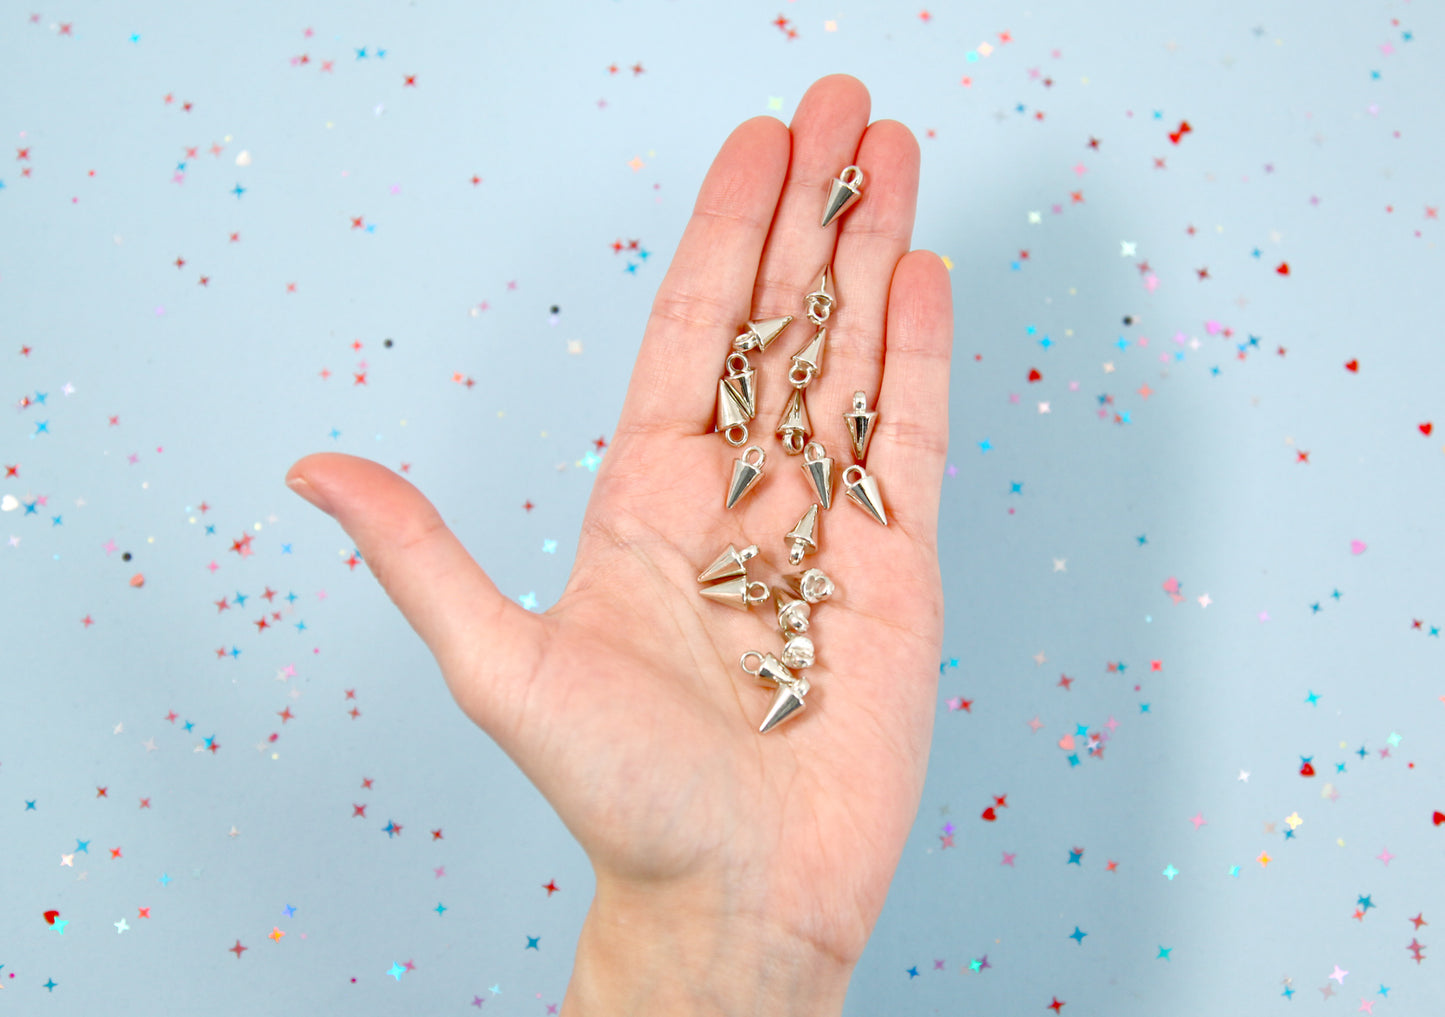 Small Spike Charms - 50 pc set - 15mm Small Spiky Charm - Electroplated Silver - With Holes to Easily make Jewelry